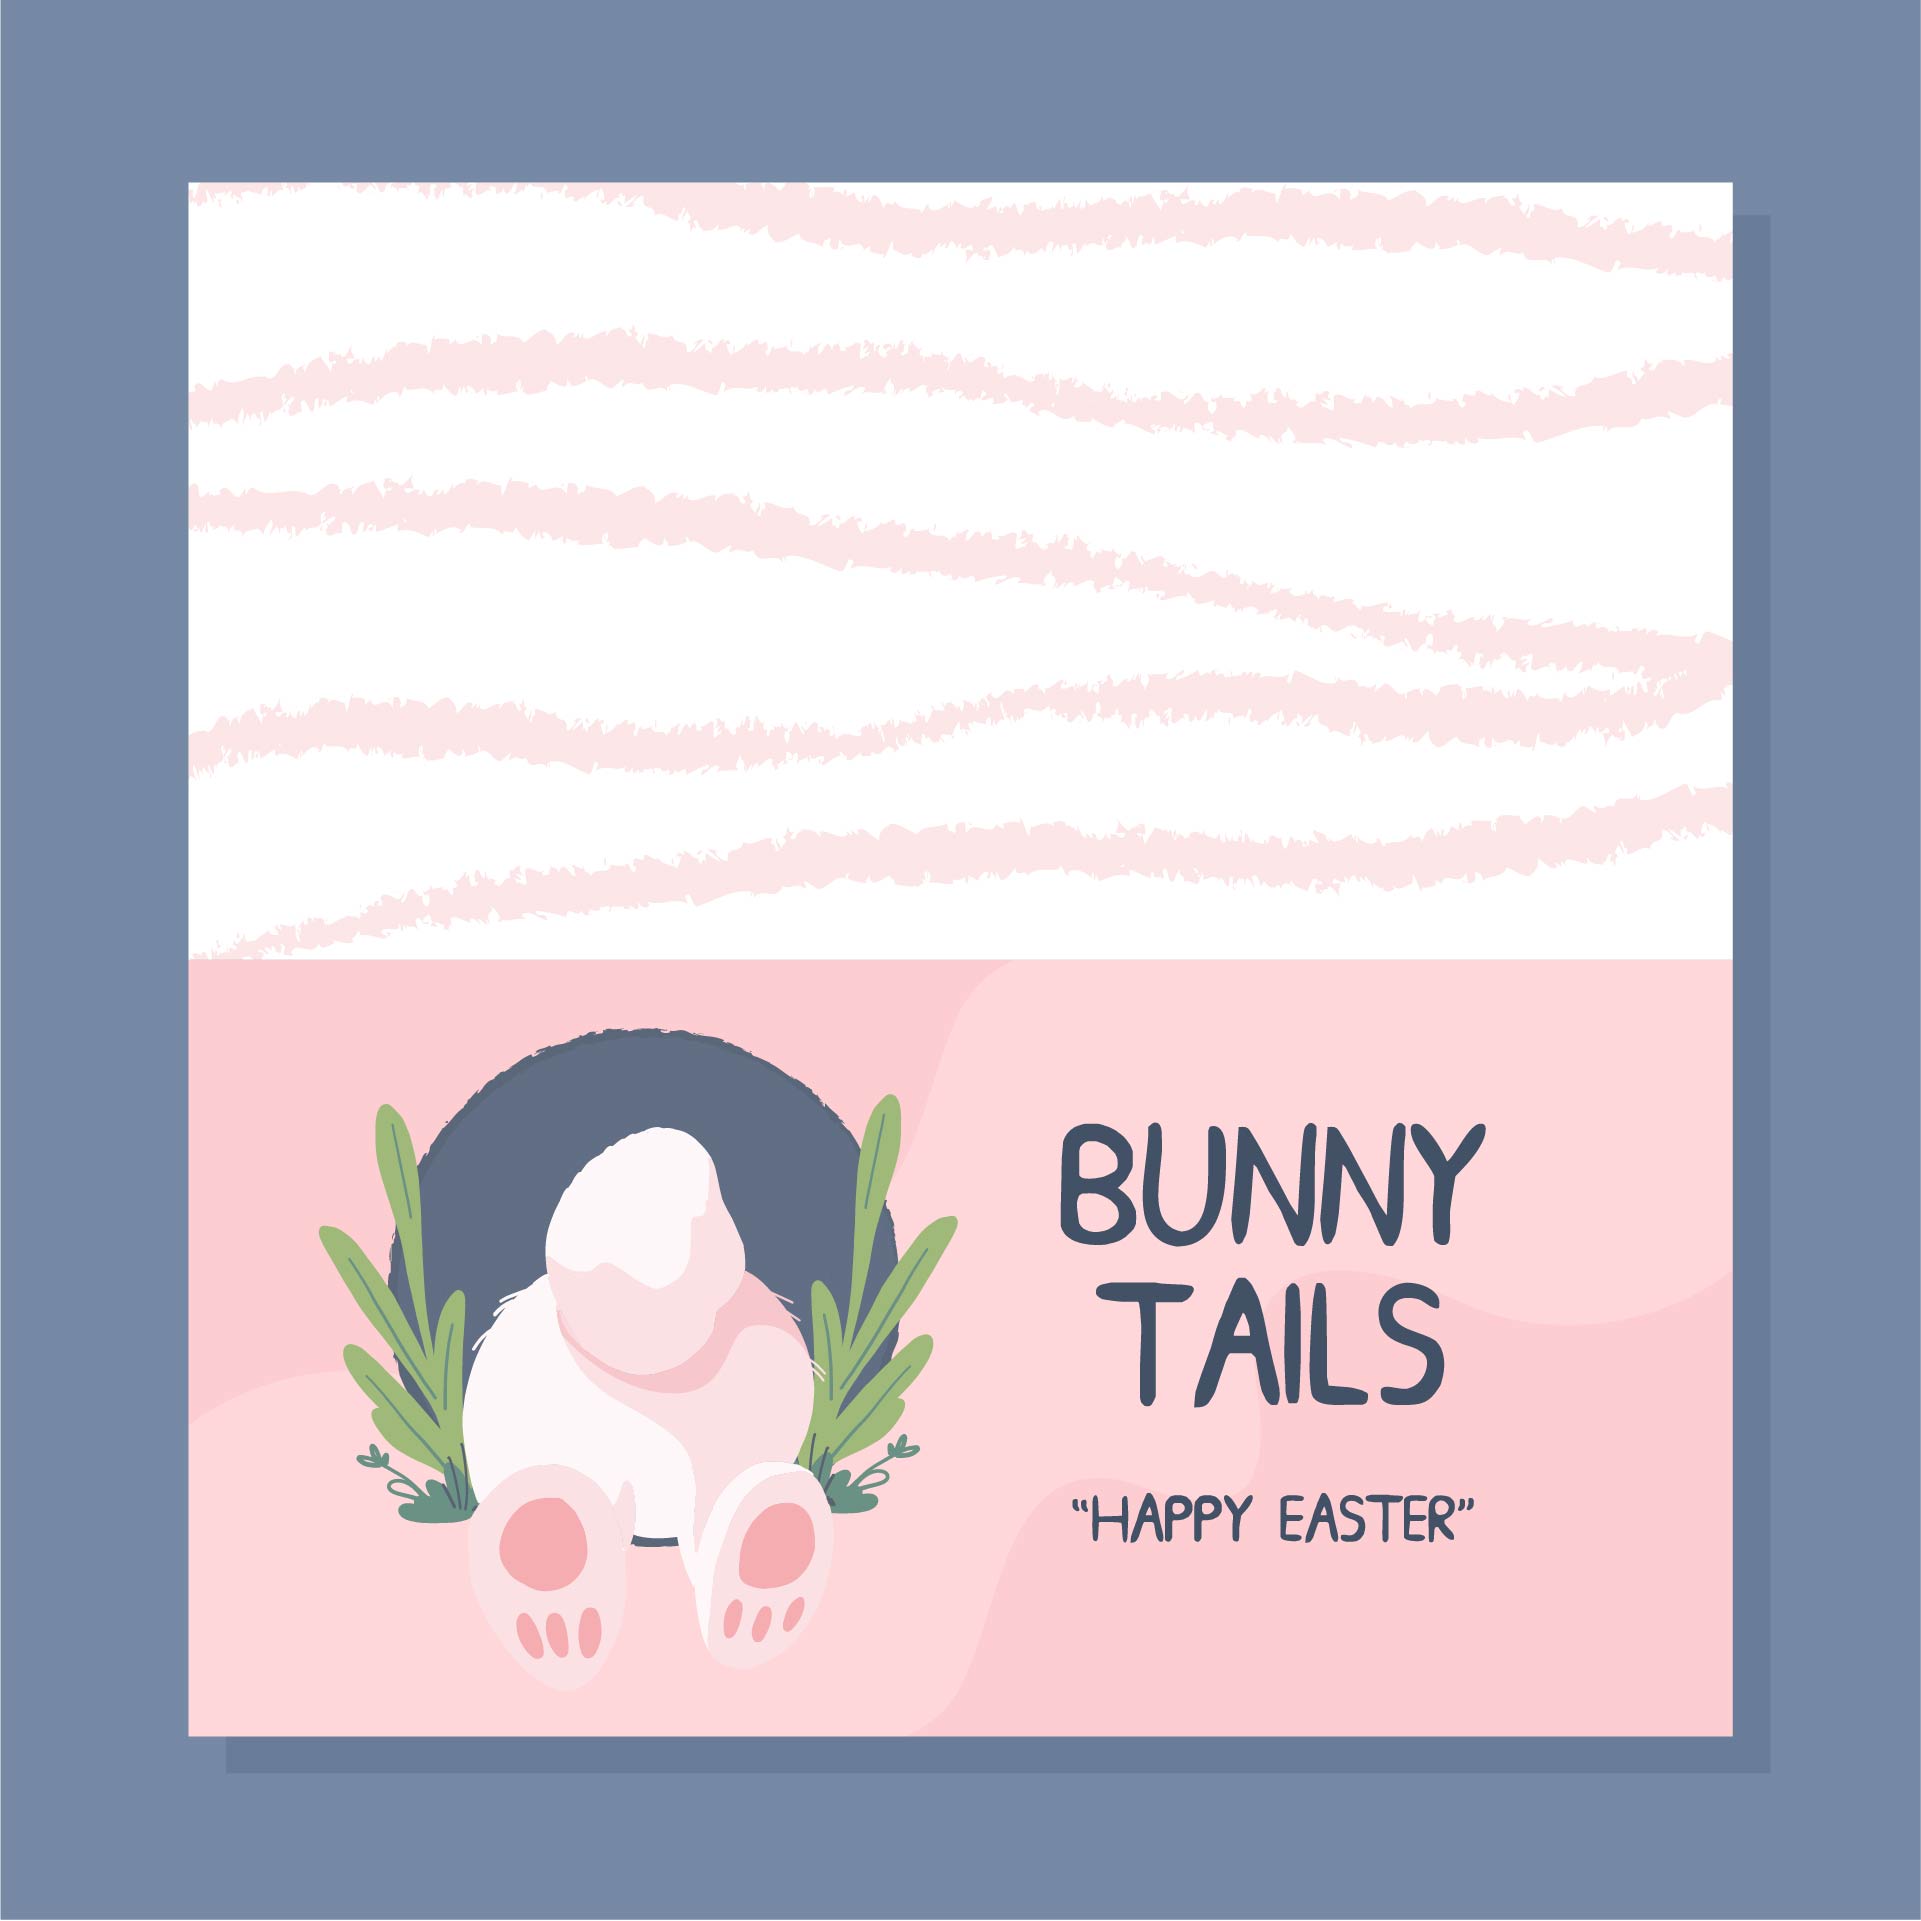 Printable Easter Bunny Tails in a Hole